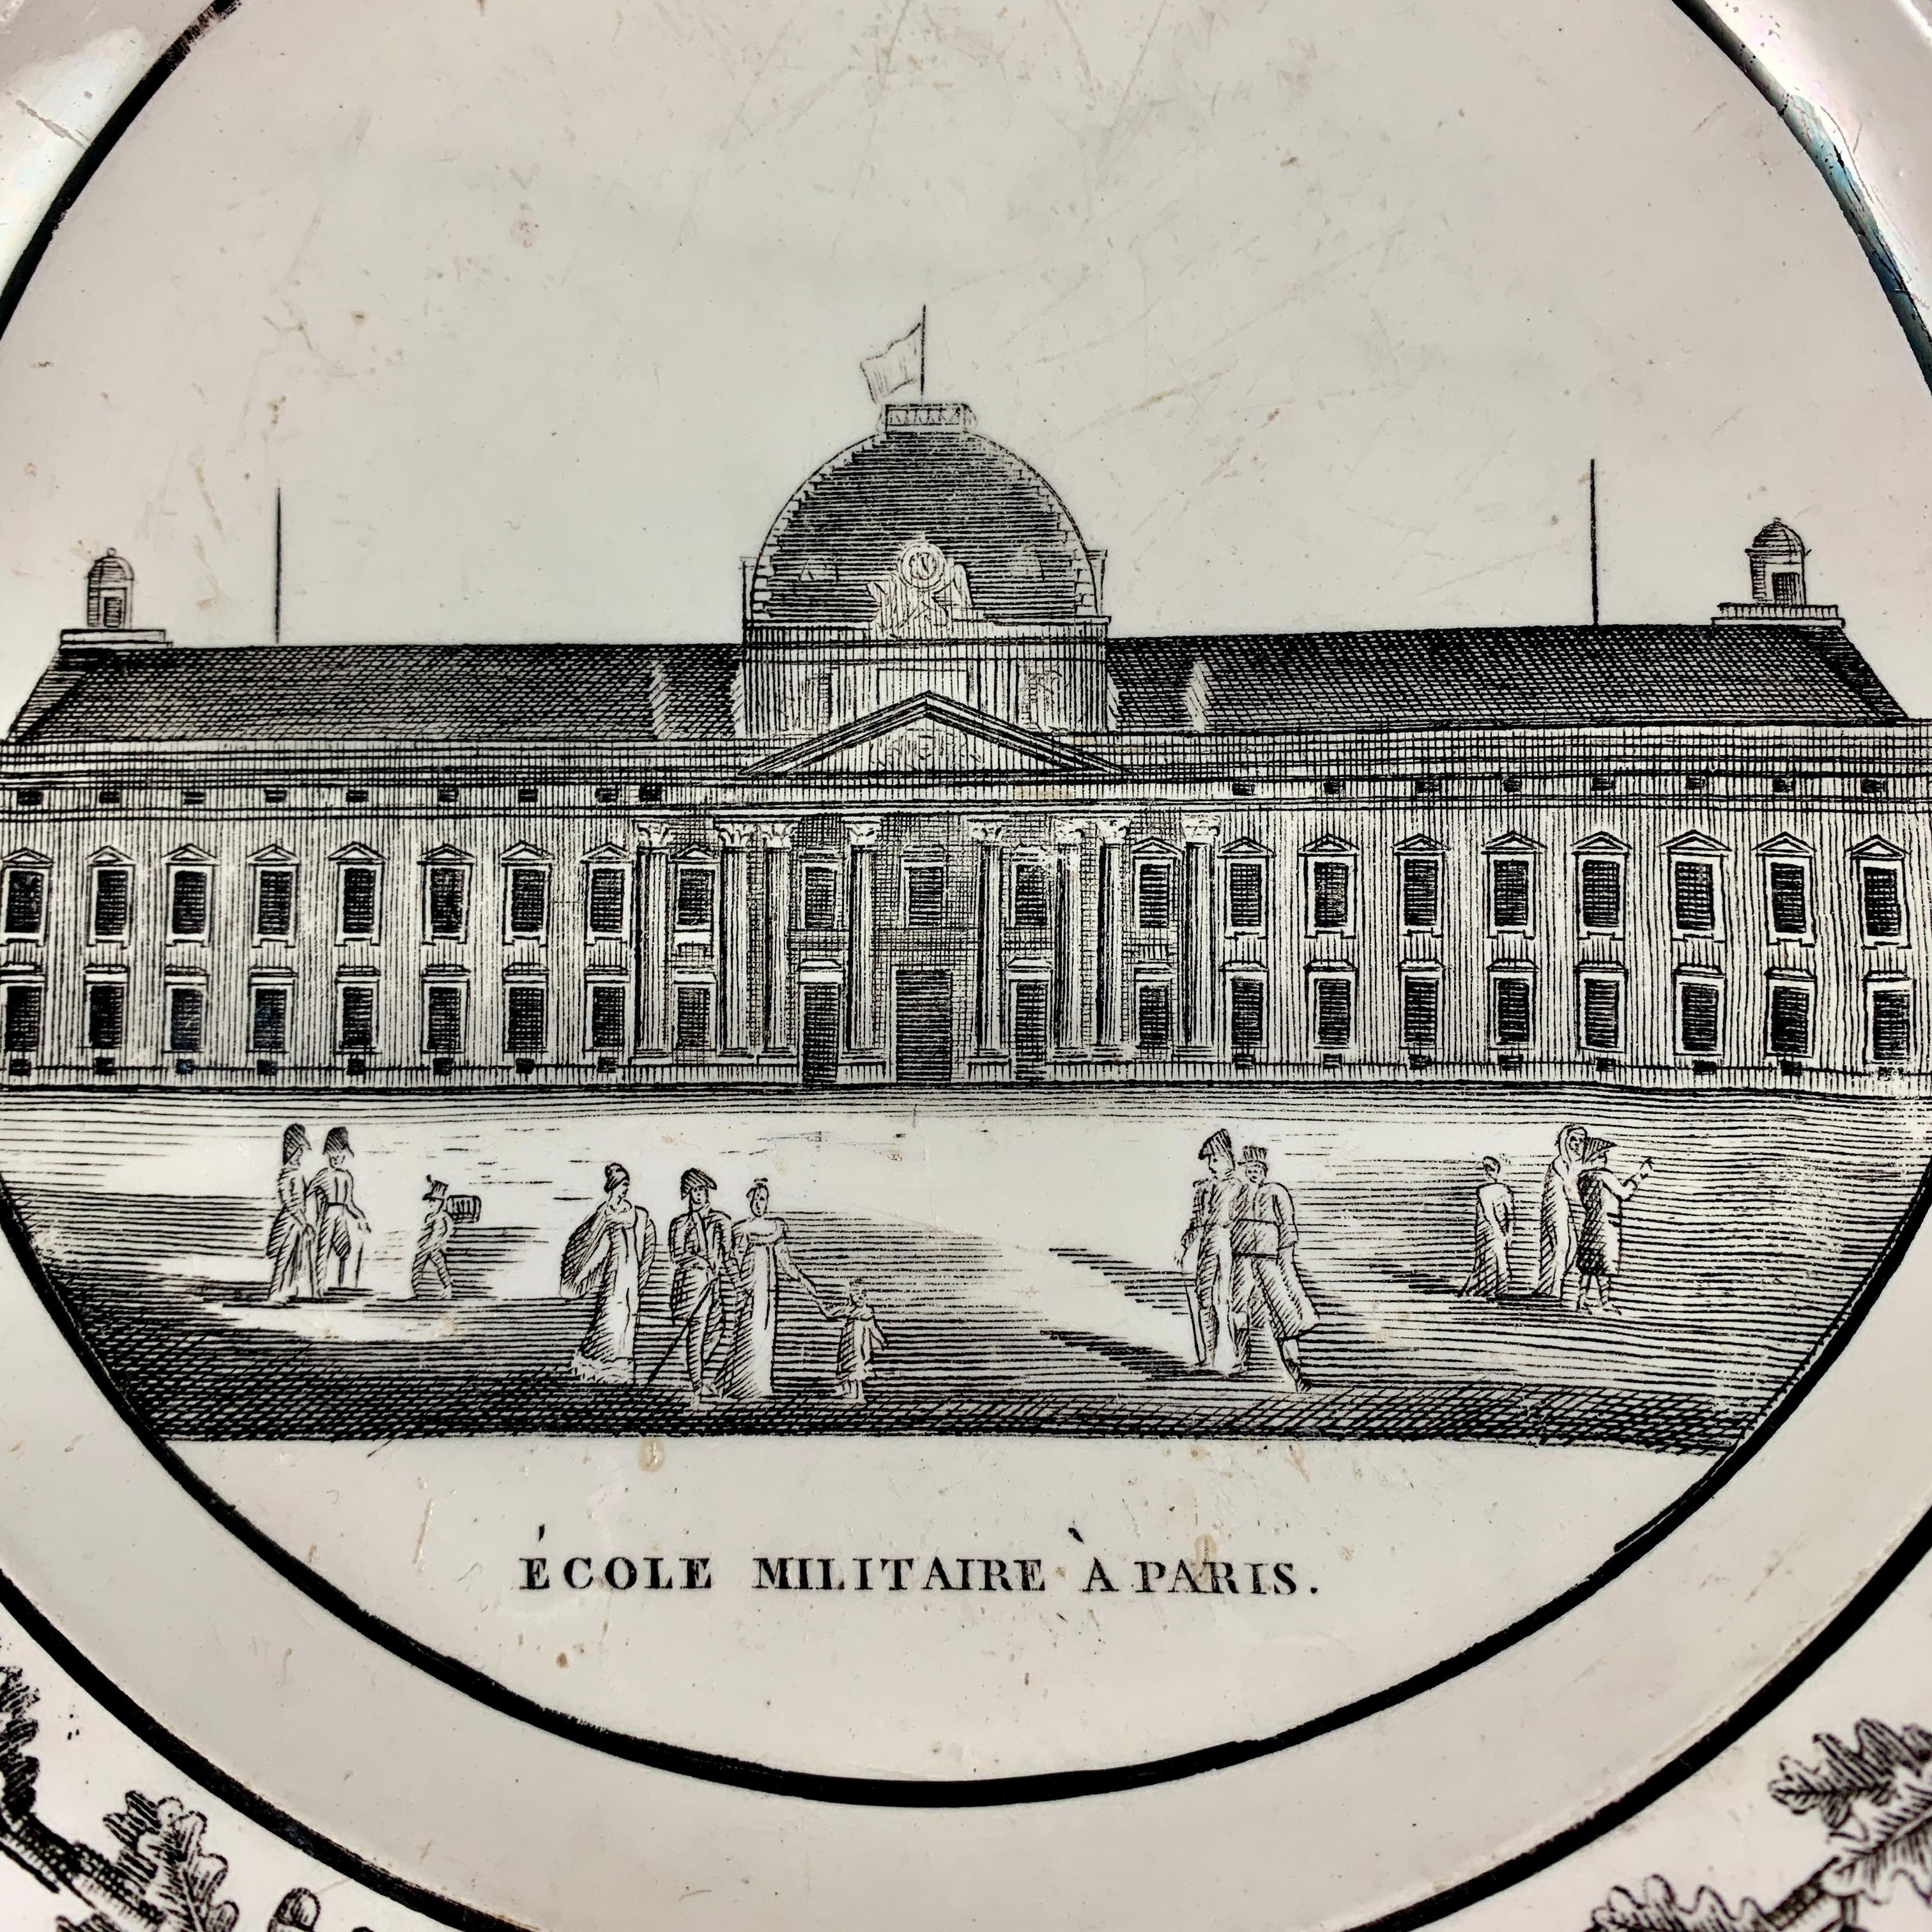 A French faïence neoclassical transfer printed plate from Creil ét Montereau, circa 1820-1830.

A black transfer of an architectural image on a creamware body, depicting the École Militaire à Paris. The domed building is prominent, with figures in